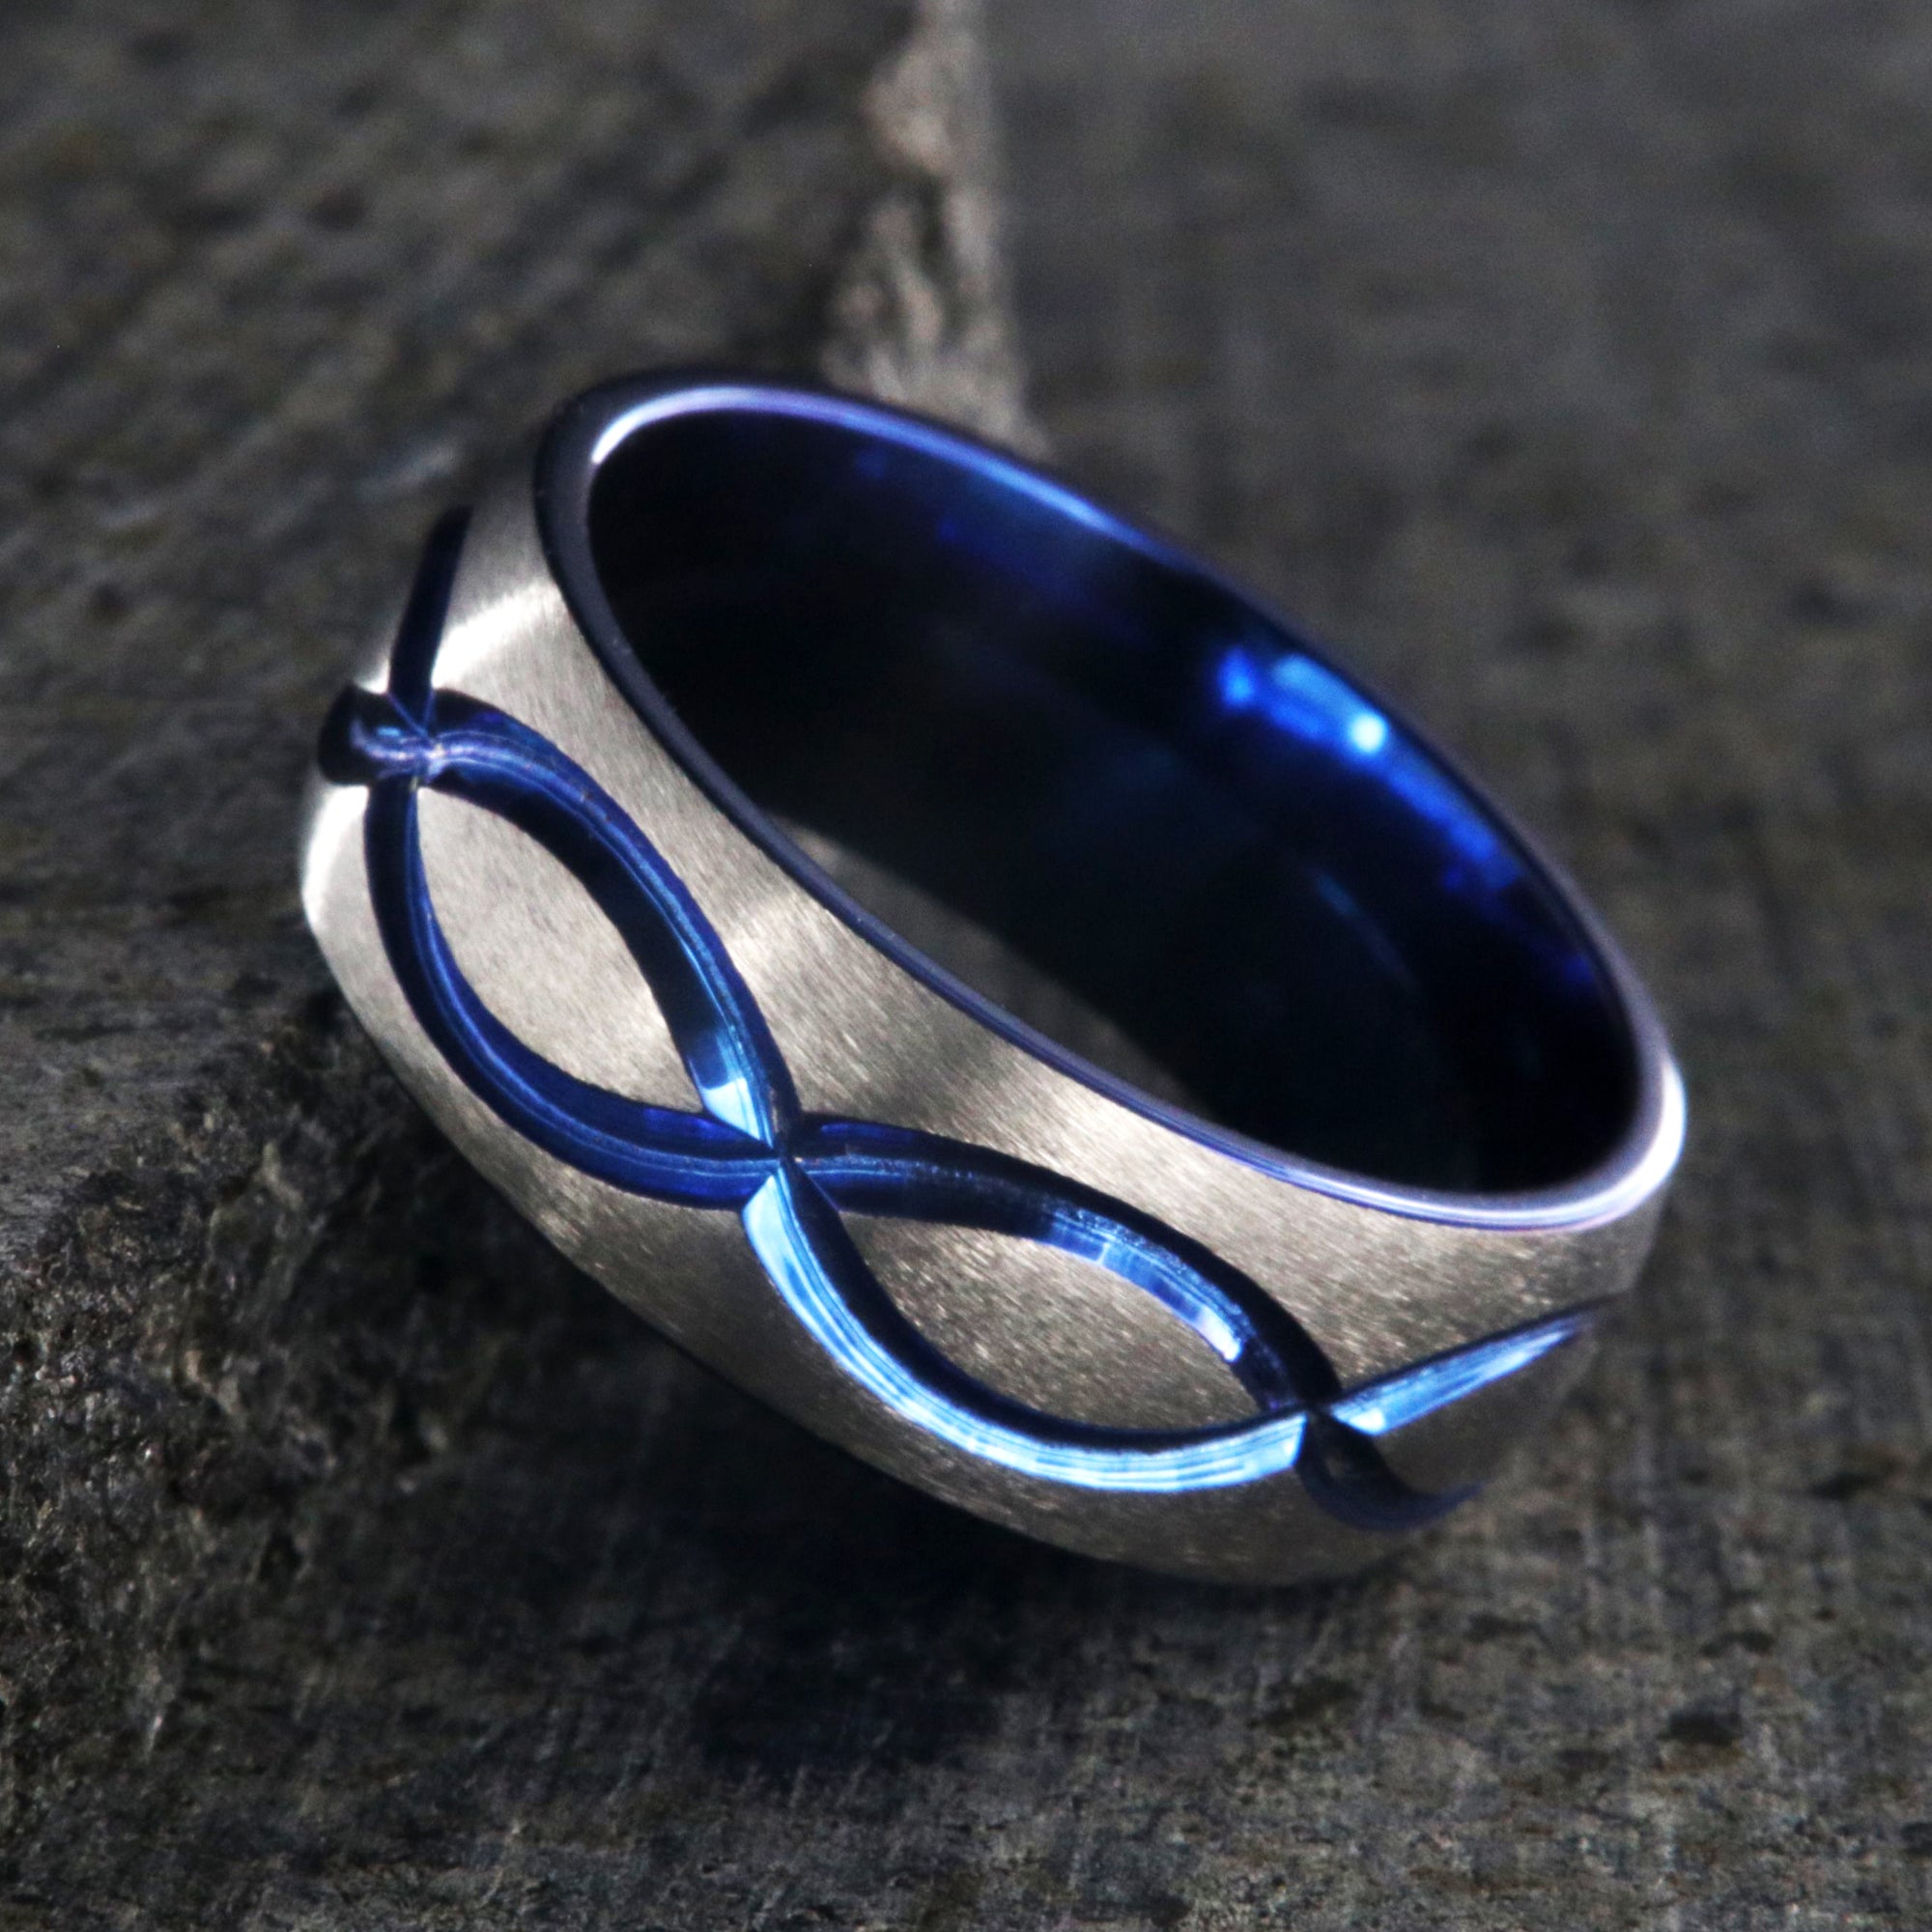 8mm wide titanium wedding band with a blue infinity design and blue sleeve